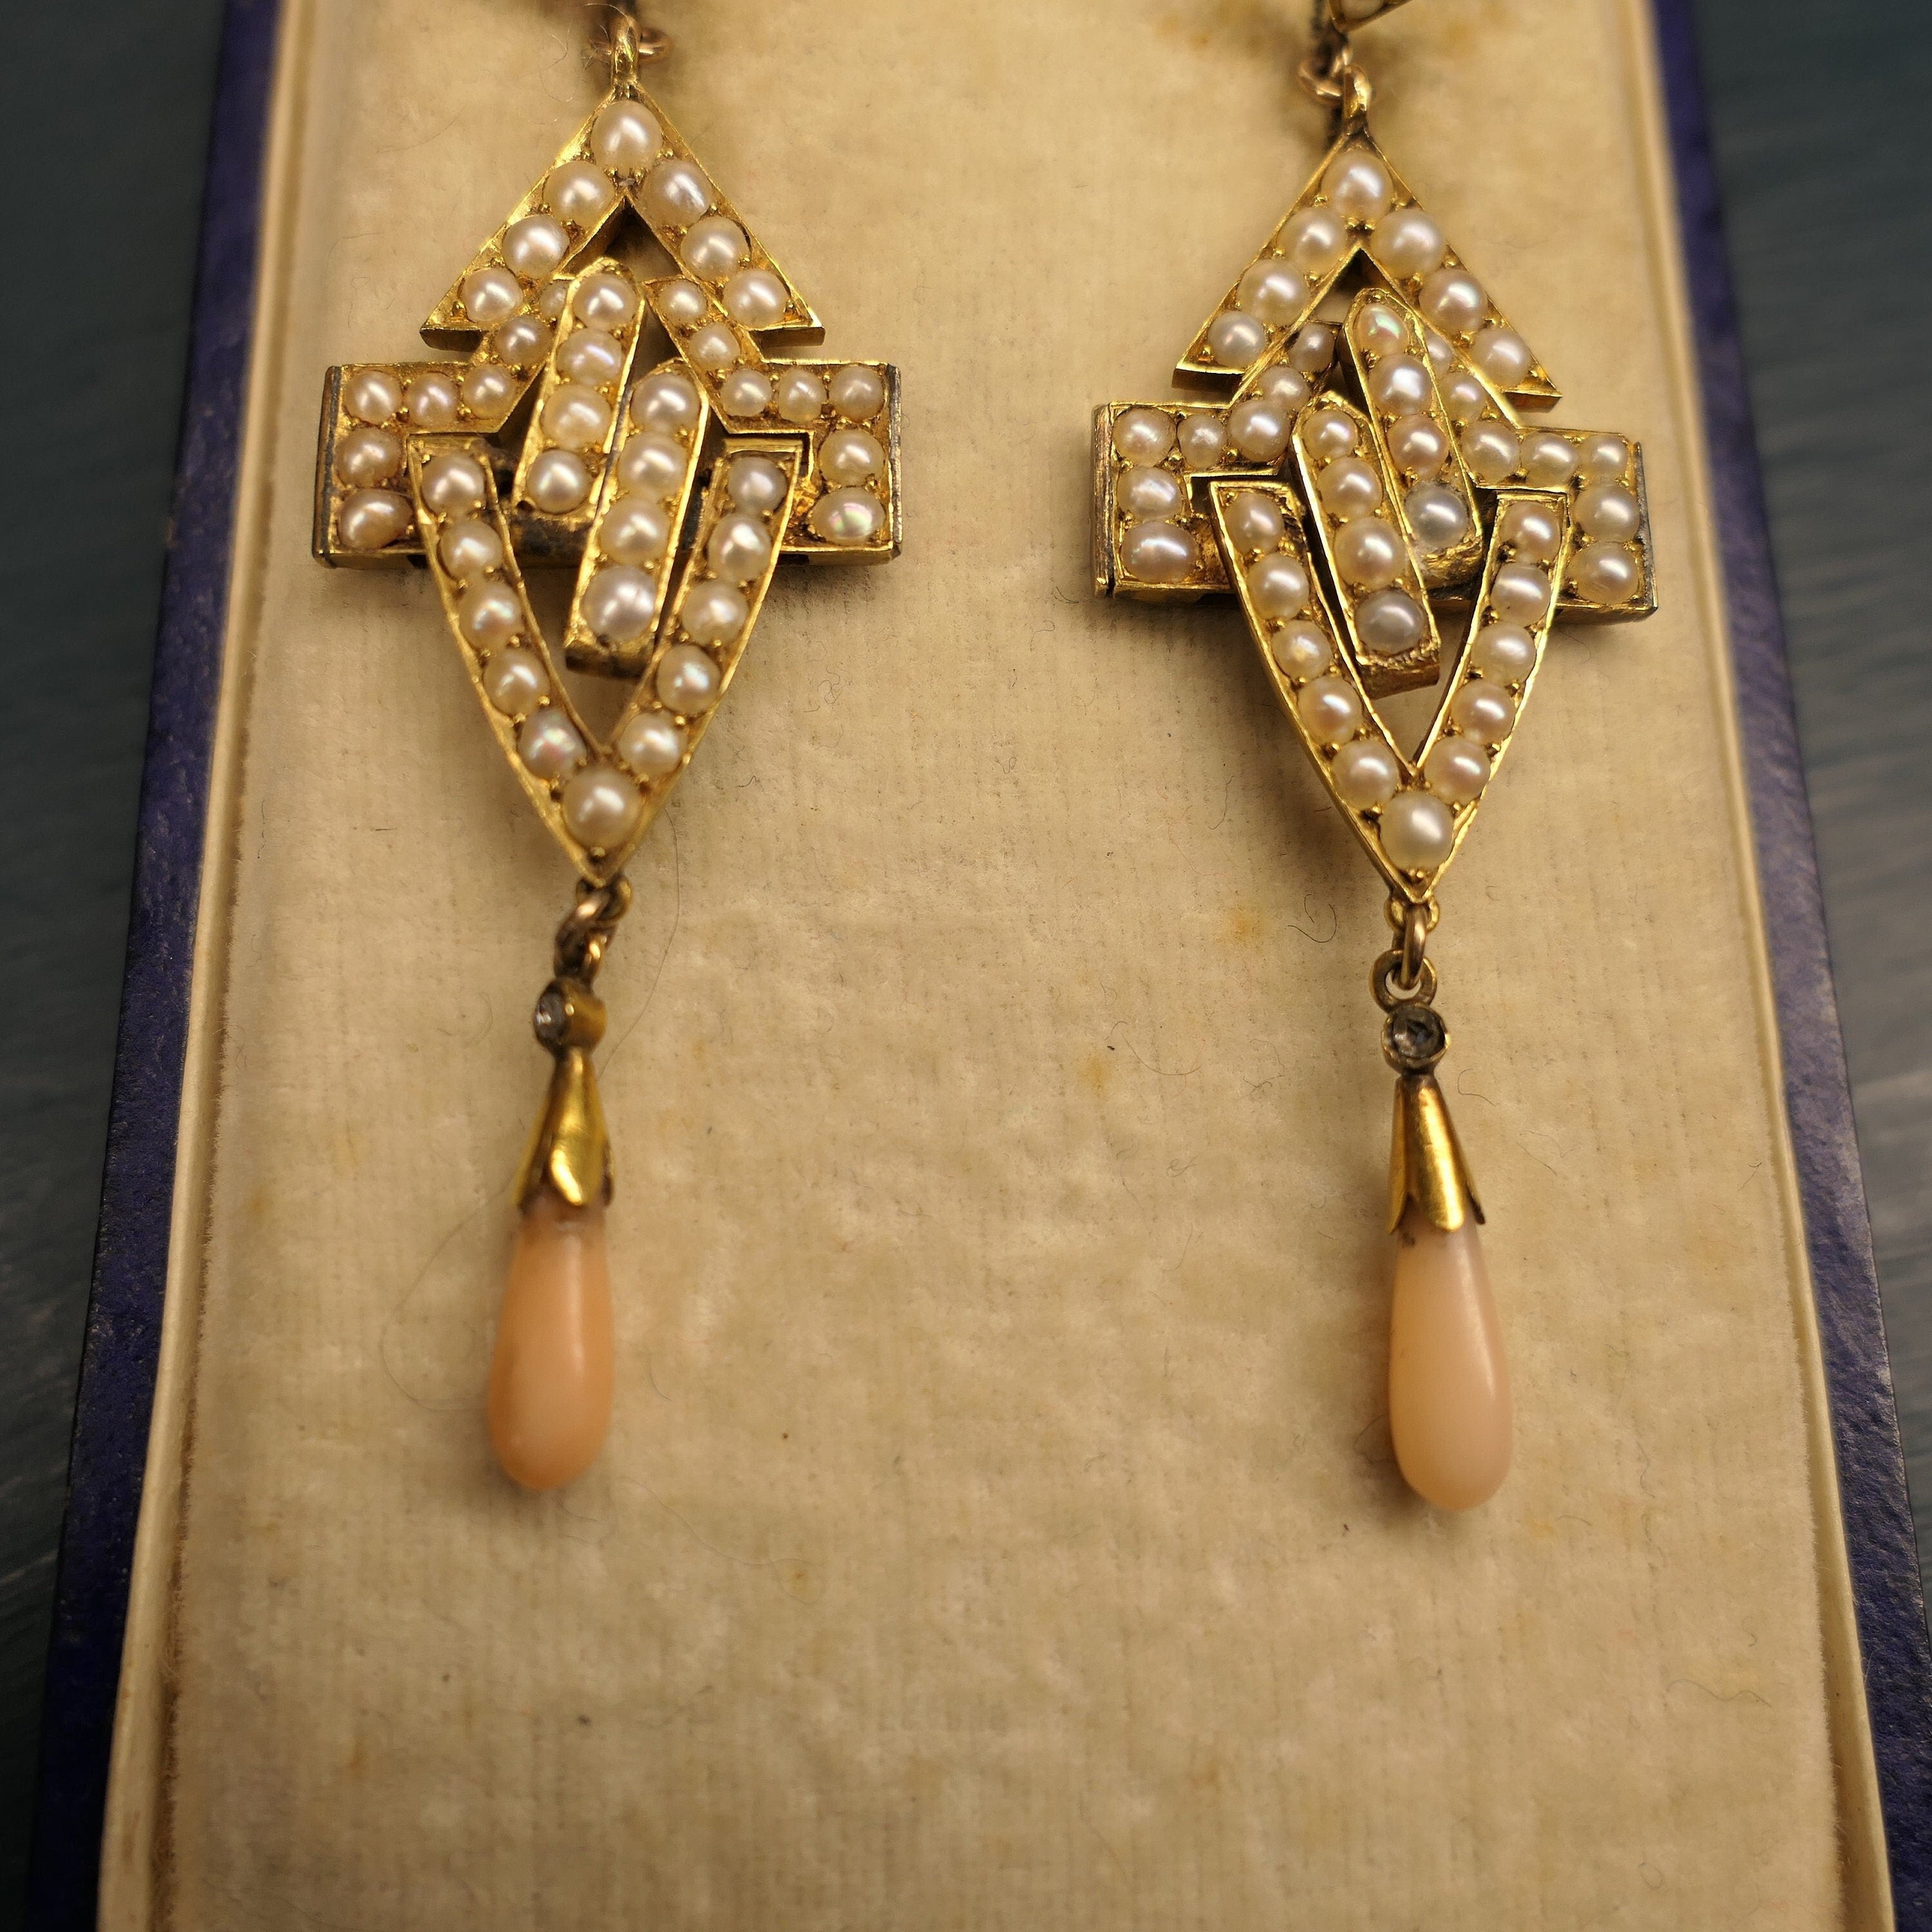 Original art deco, seed pearl, coral and old rose cut diamond, large gold drop earrings